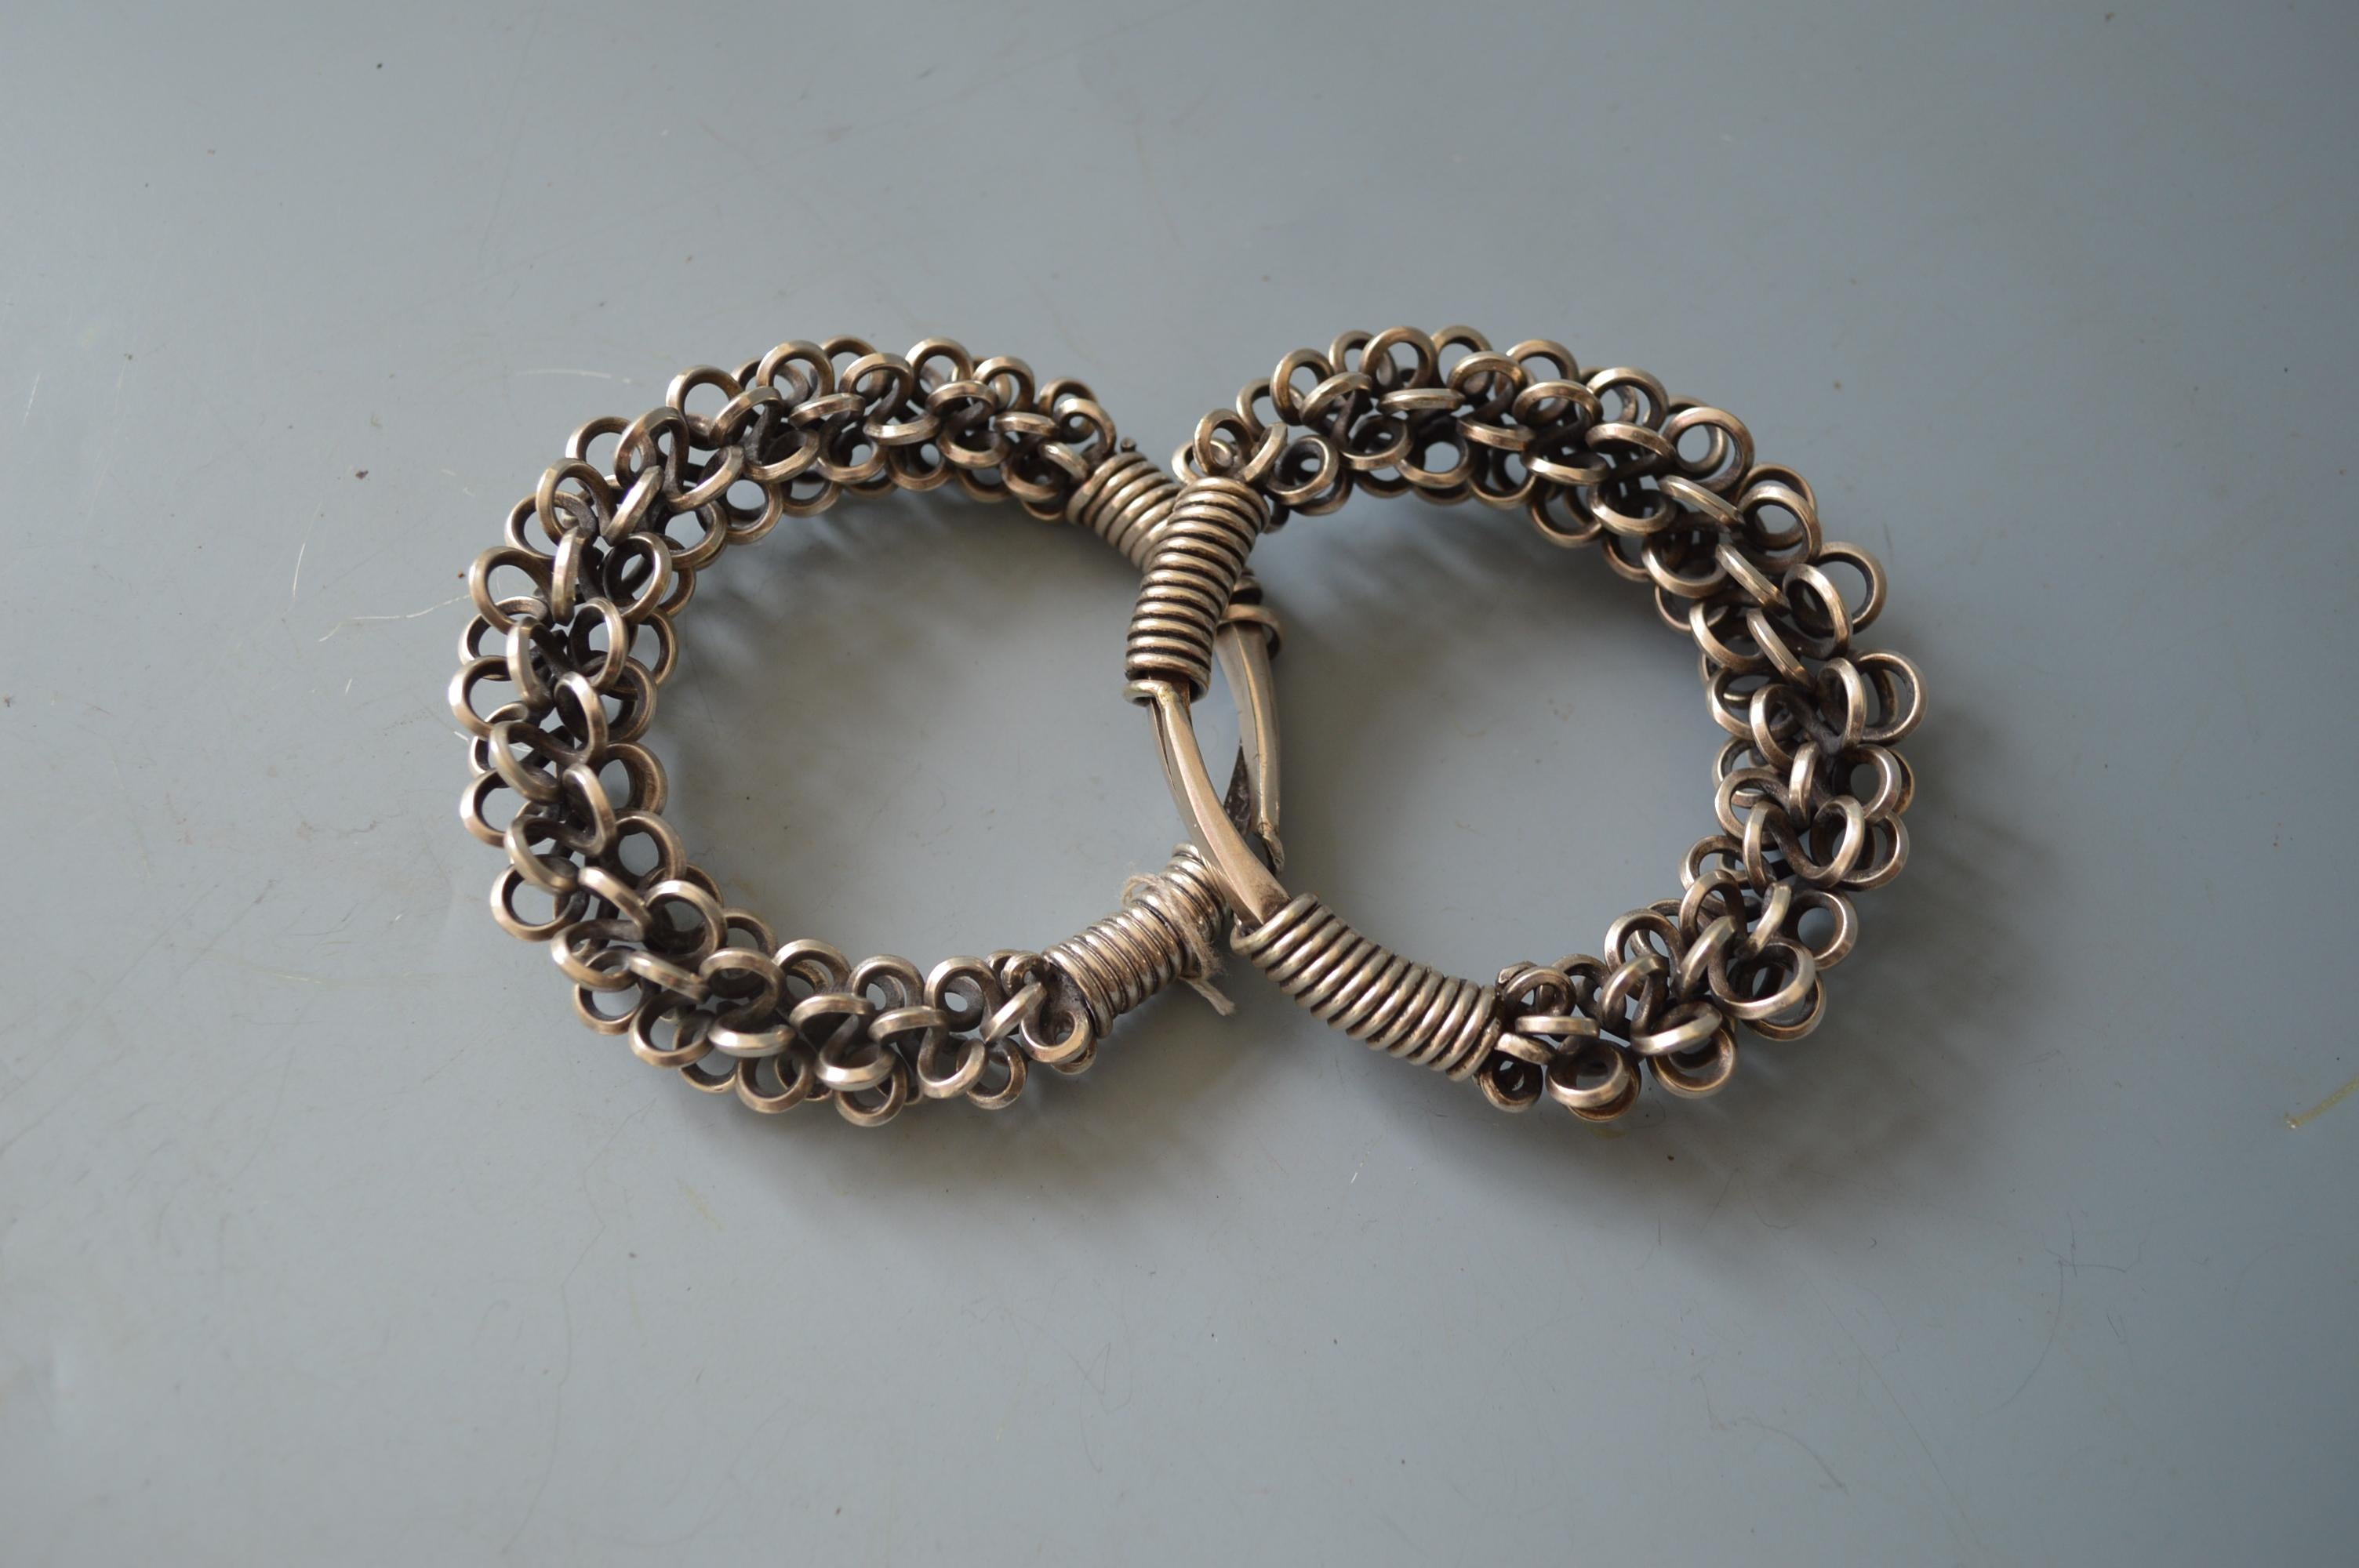 A fine pair of Hmong or Miao silver bracelets from the Golden Triangle region of south east Asia: Laos Thailand Yunnan China South East Asia
A substantial pair of Tribal bracelets crafted from wound hammered high grade silver, they have a